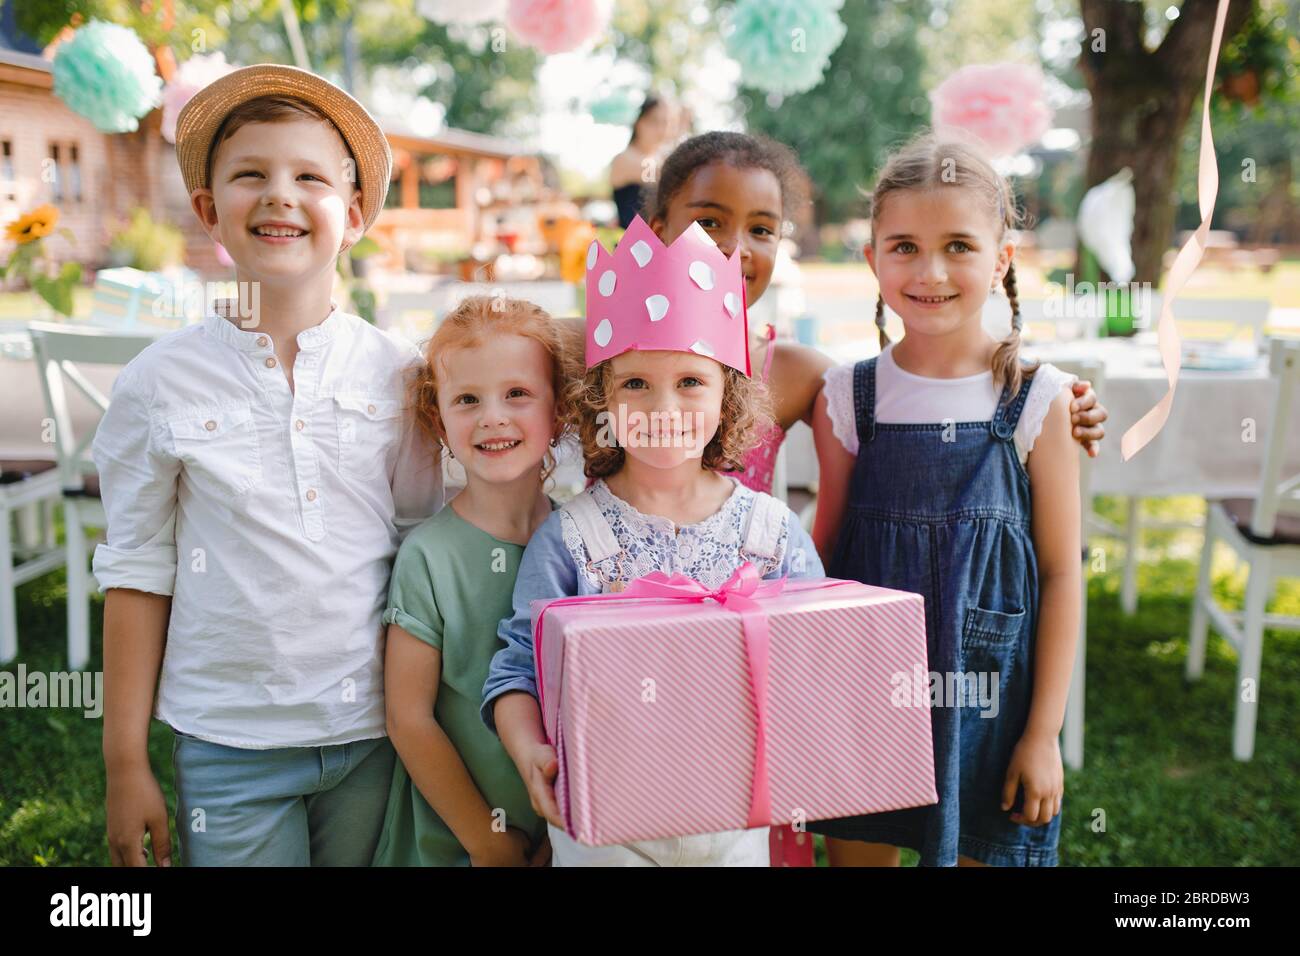 Portrait of small girl with friends and present outdoors in garden in summer. Stock Photo